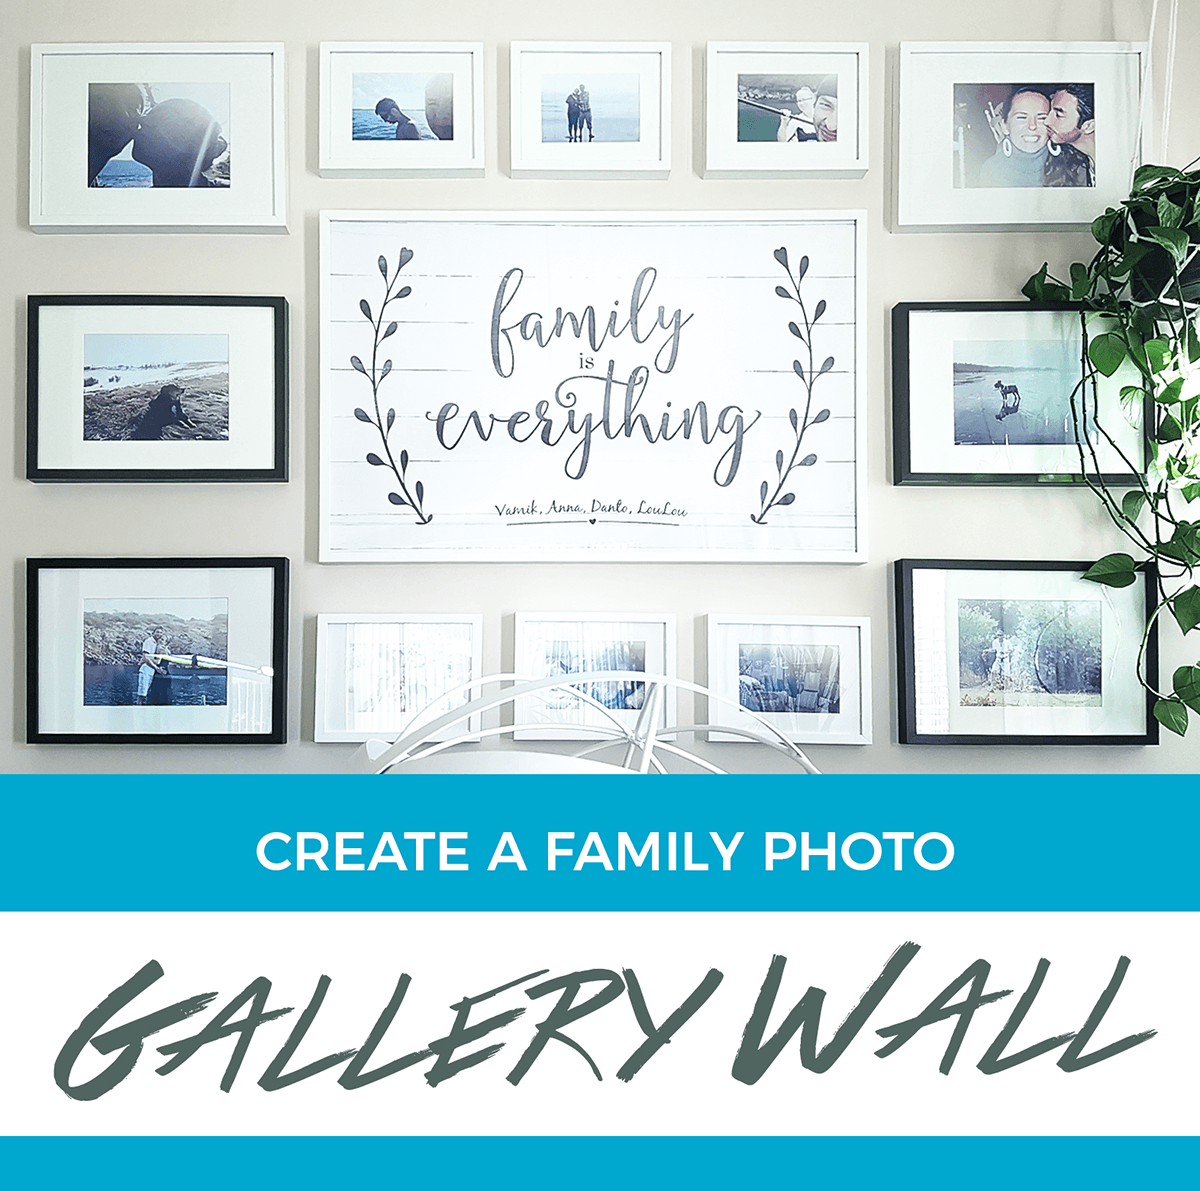 Create a family photo gallery wall